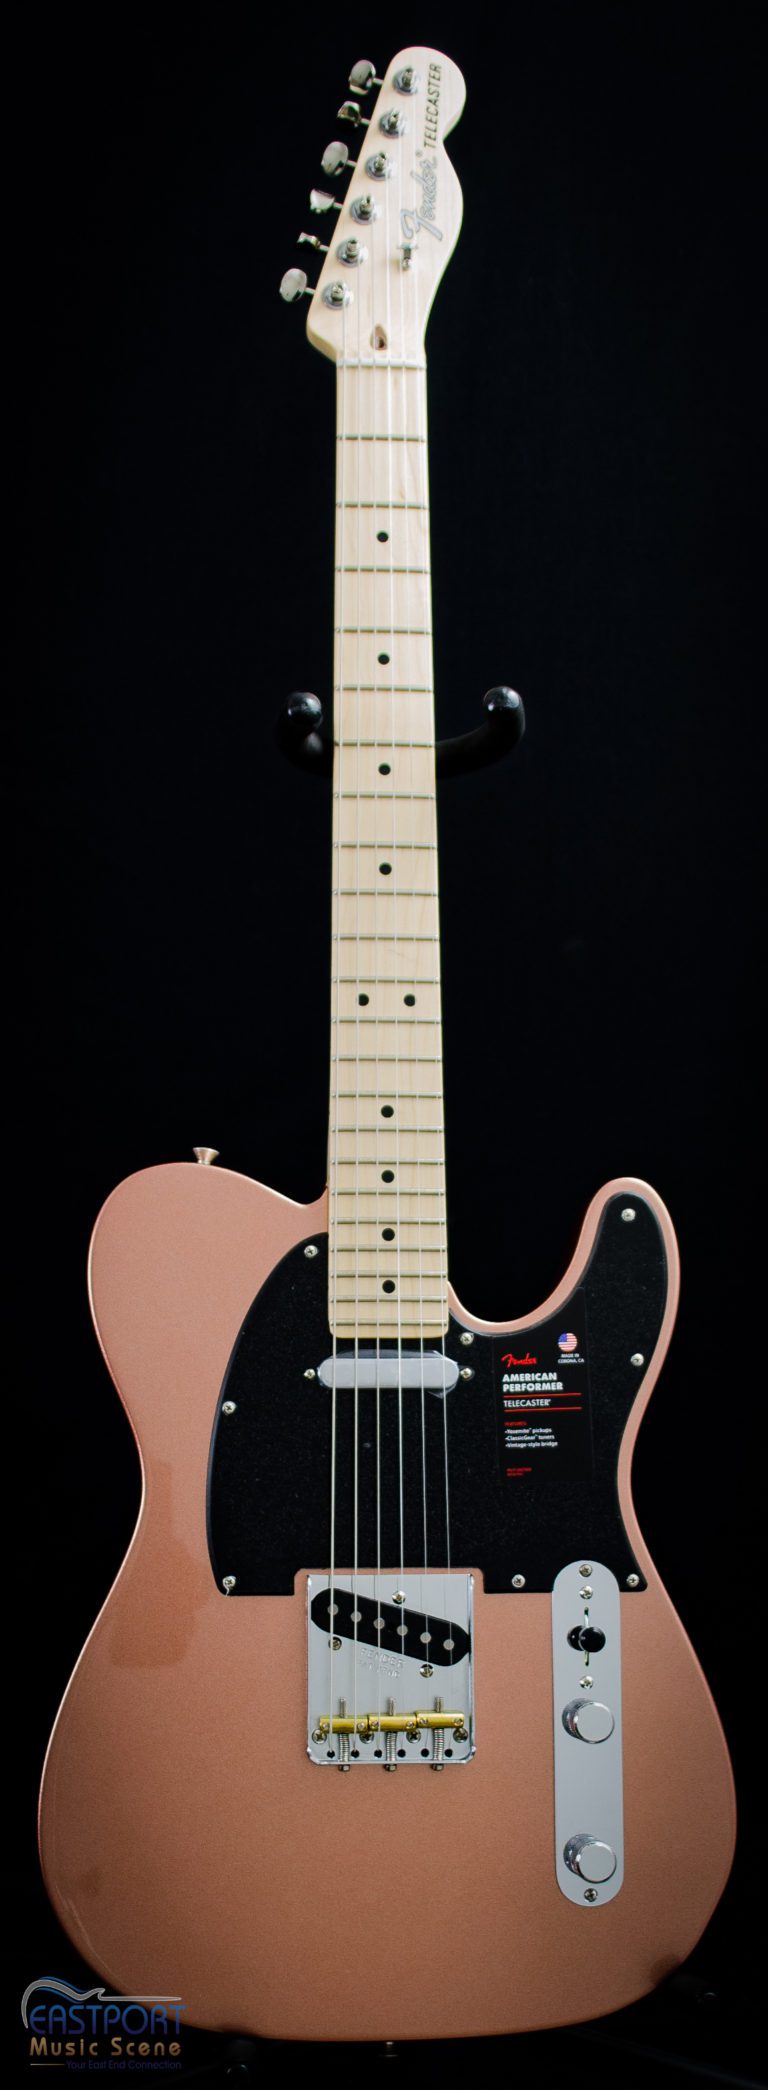 A pink guitar with black headstock and neck